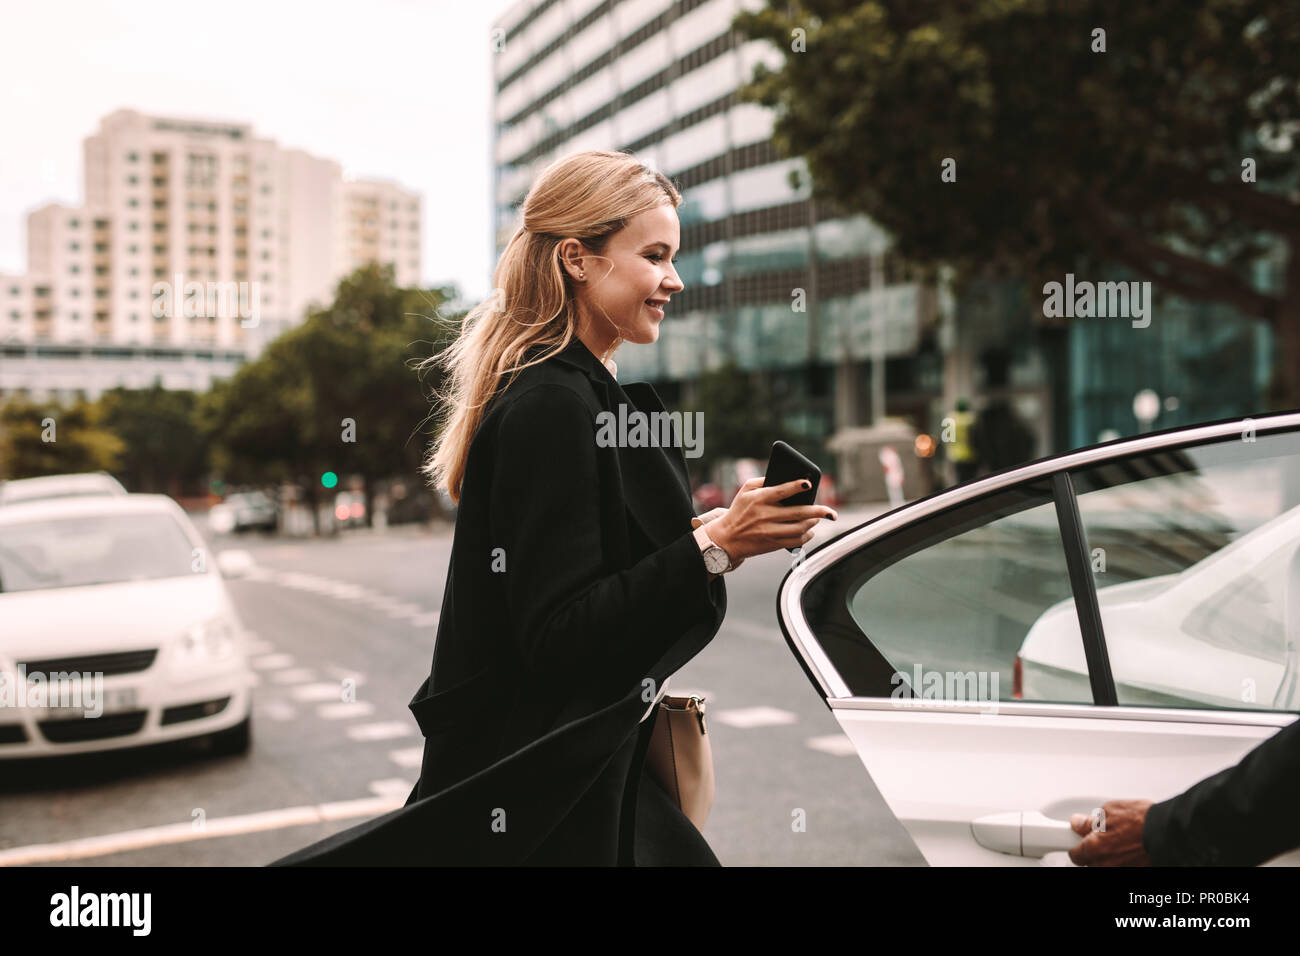 Smiling businesswoman getting into a taxi. Female commuter entering a taxi with driver opening door. Stock Photo